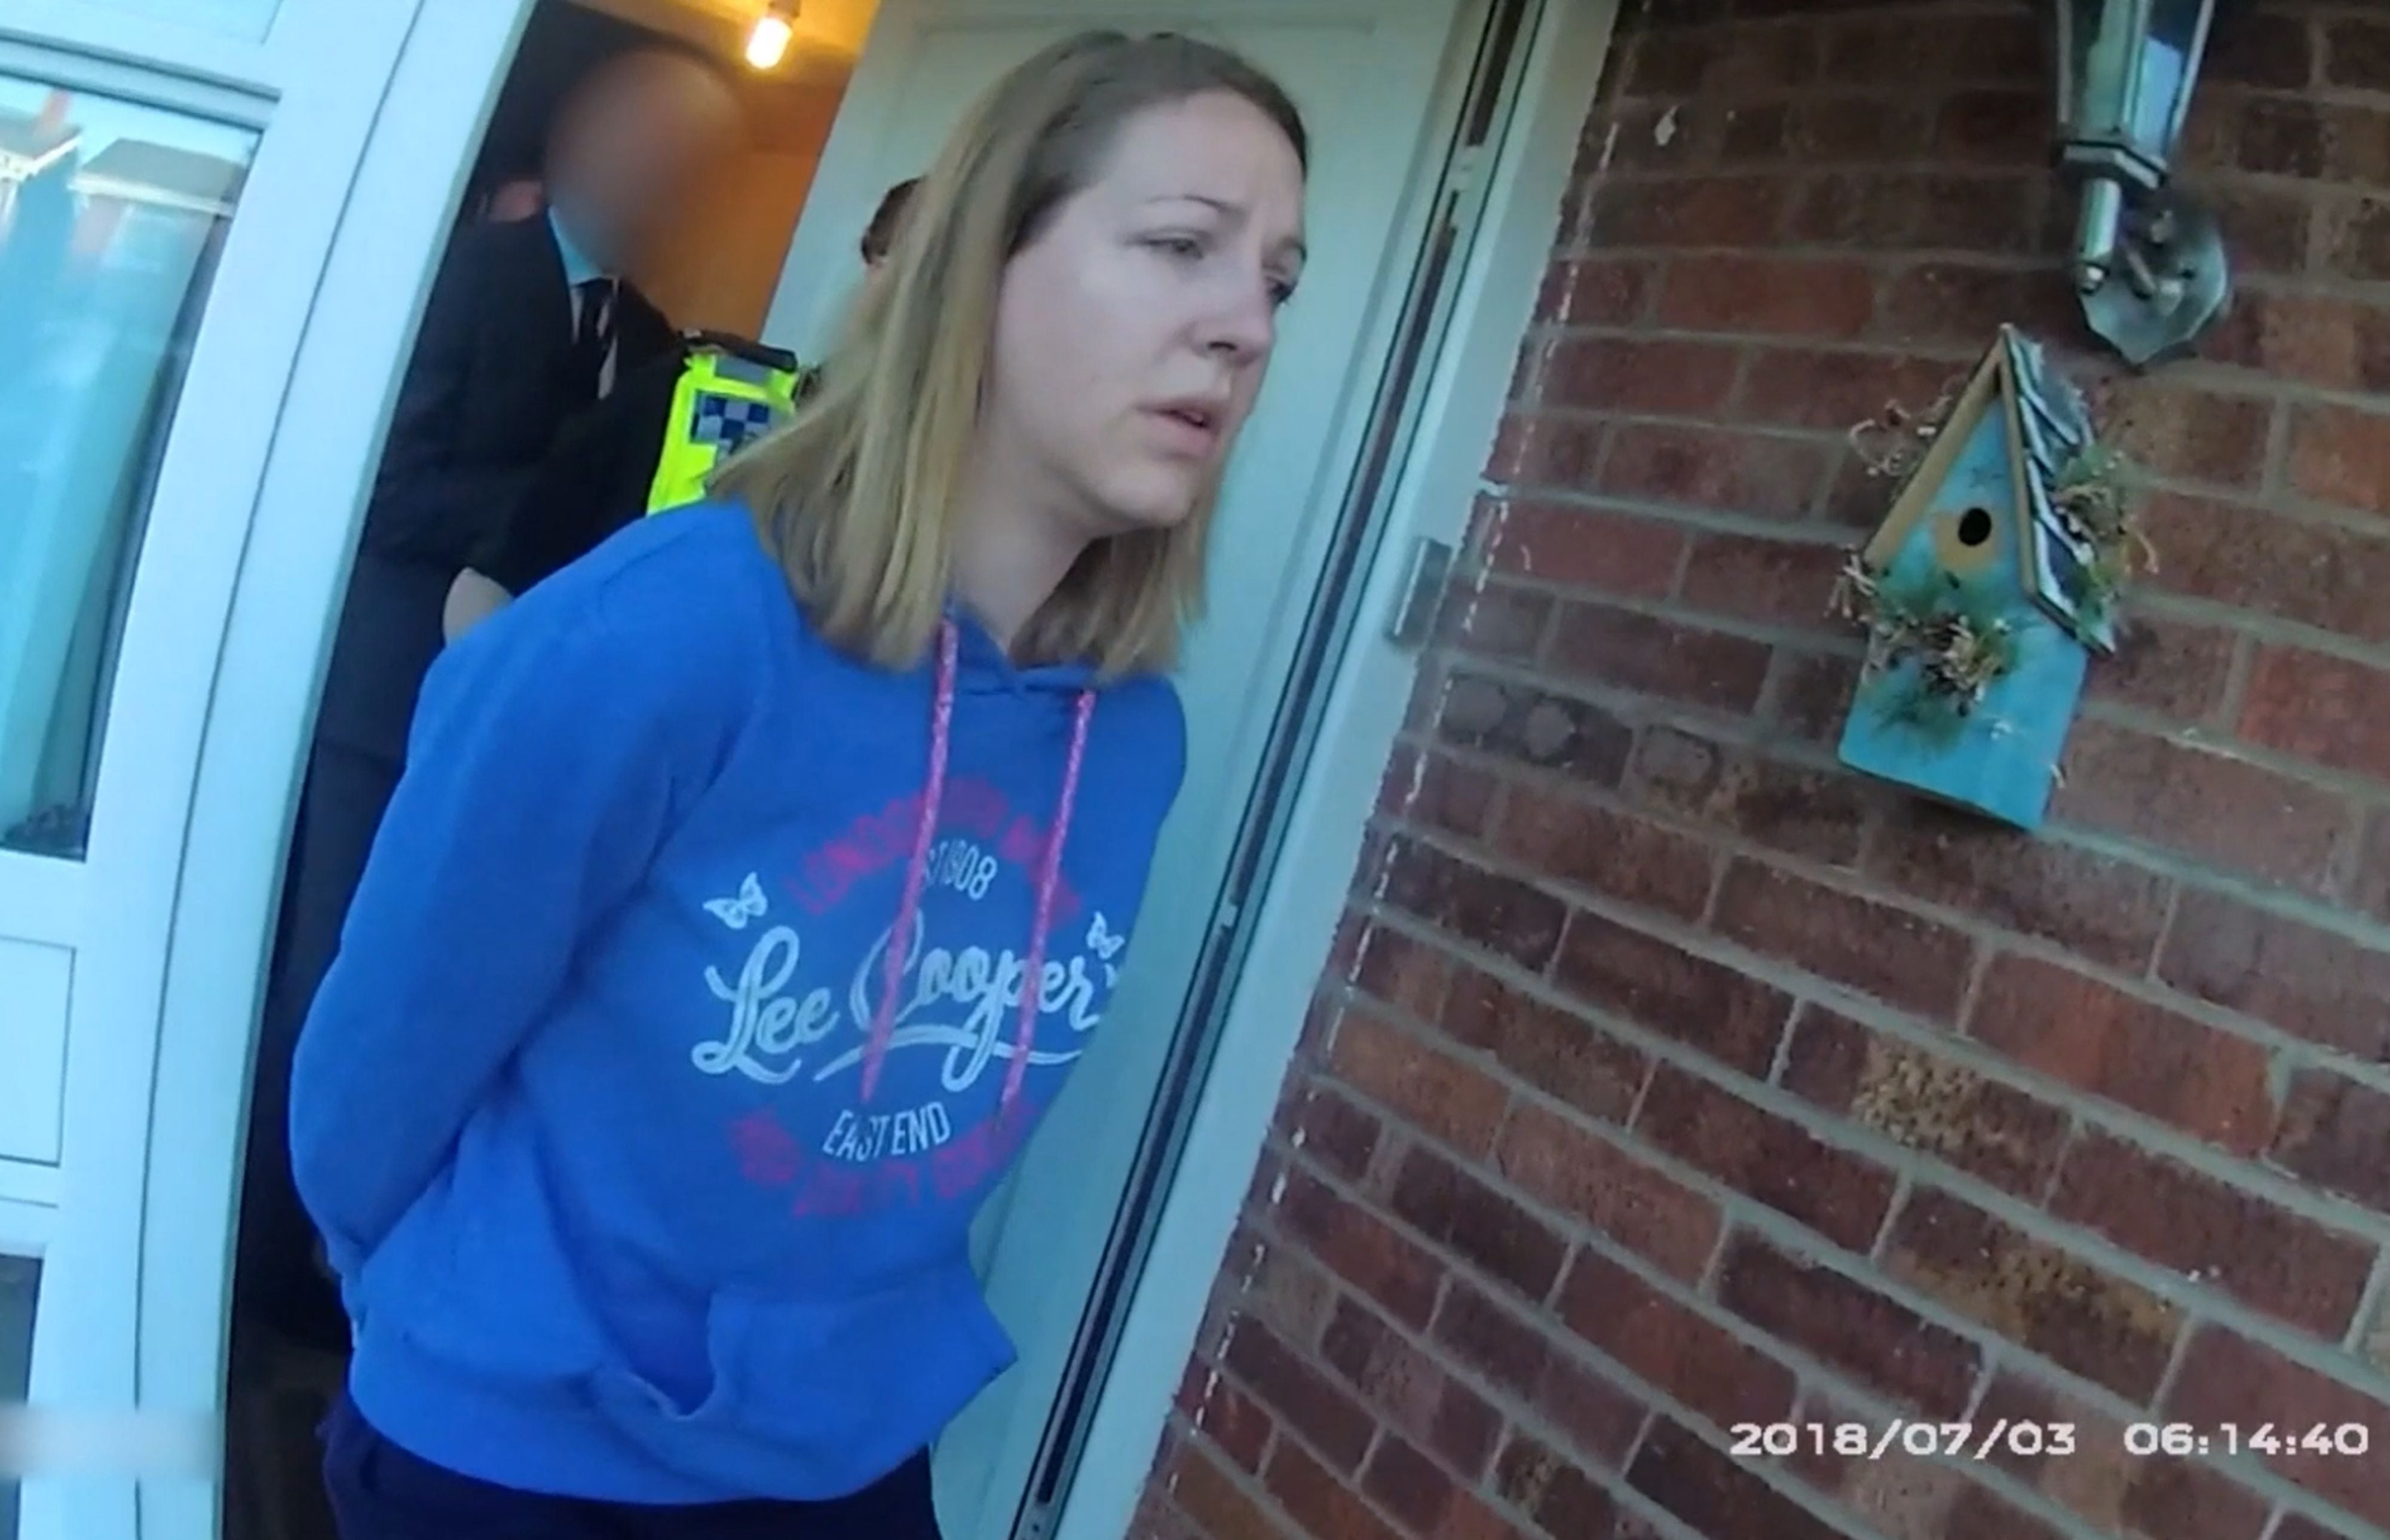 The moment Letby was taken away by police from her home